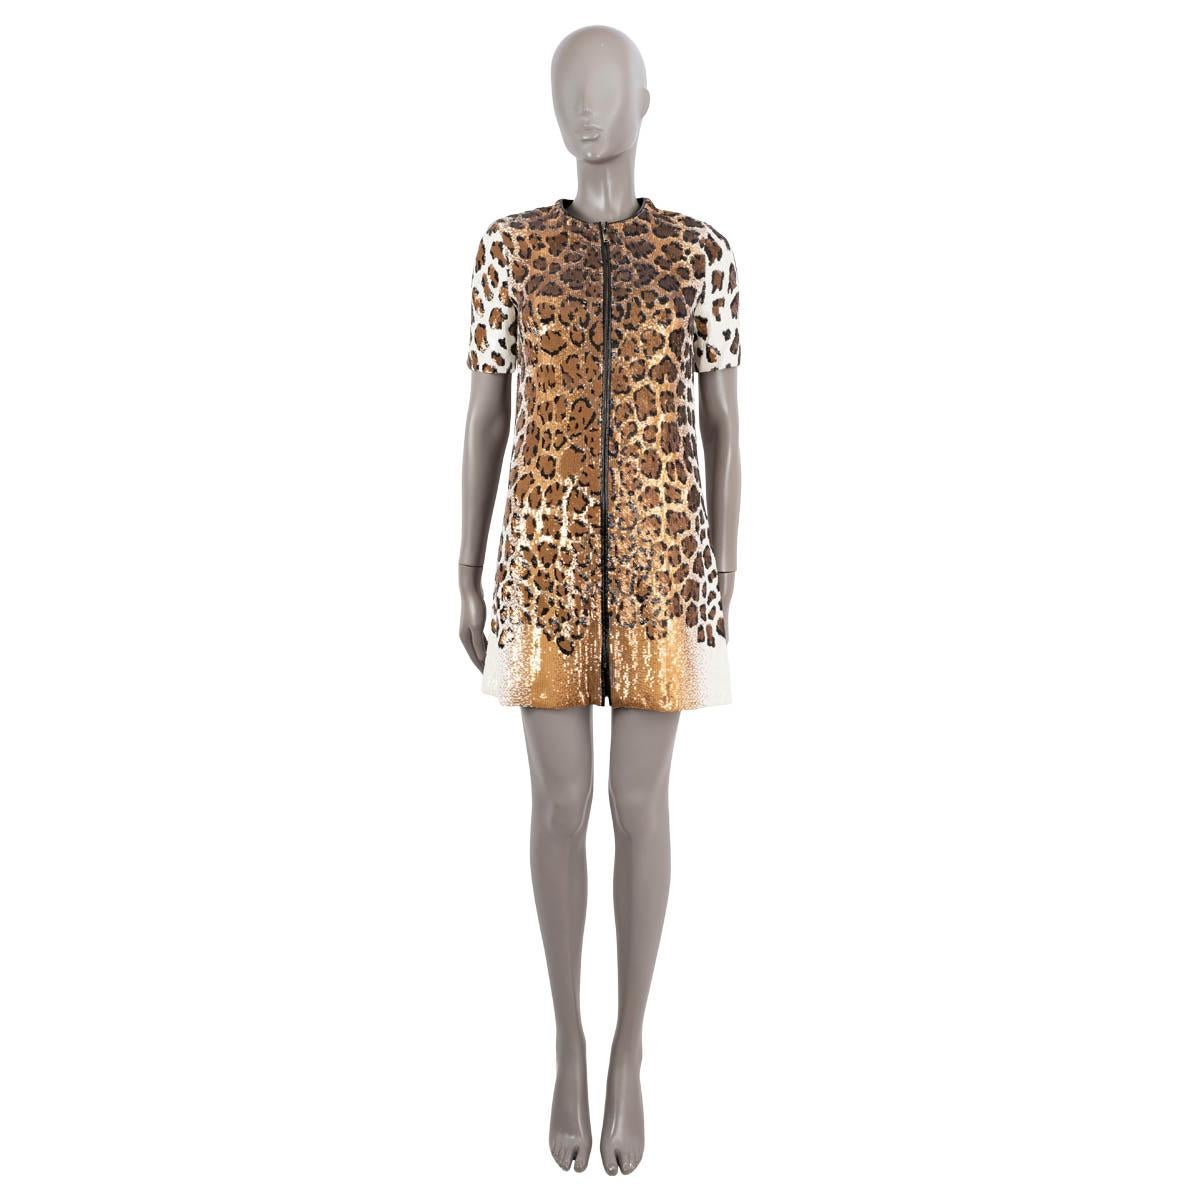 100% authentic Louis Vuitton leopard shift dress in beige, brown, black and white sequins polyester (100%). Features short sleeves and a crewneck. Closes with zipper down the front and is  lined in silk (100%). Has been worn and is in excellent